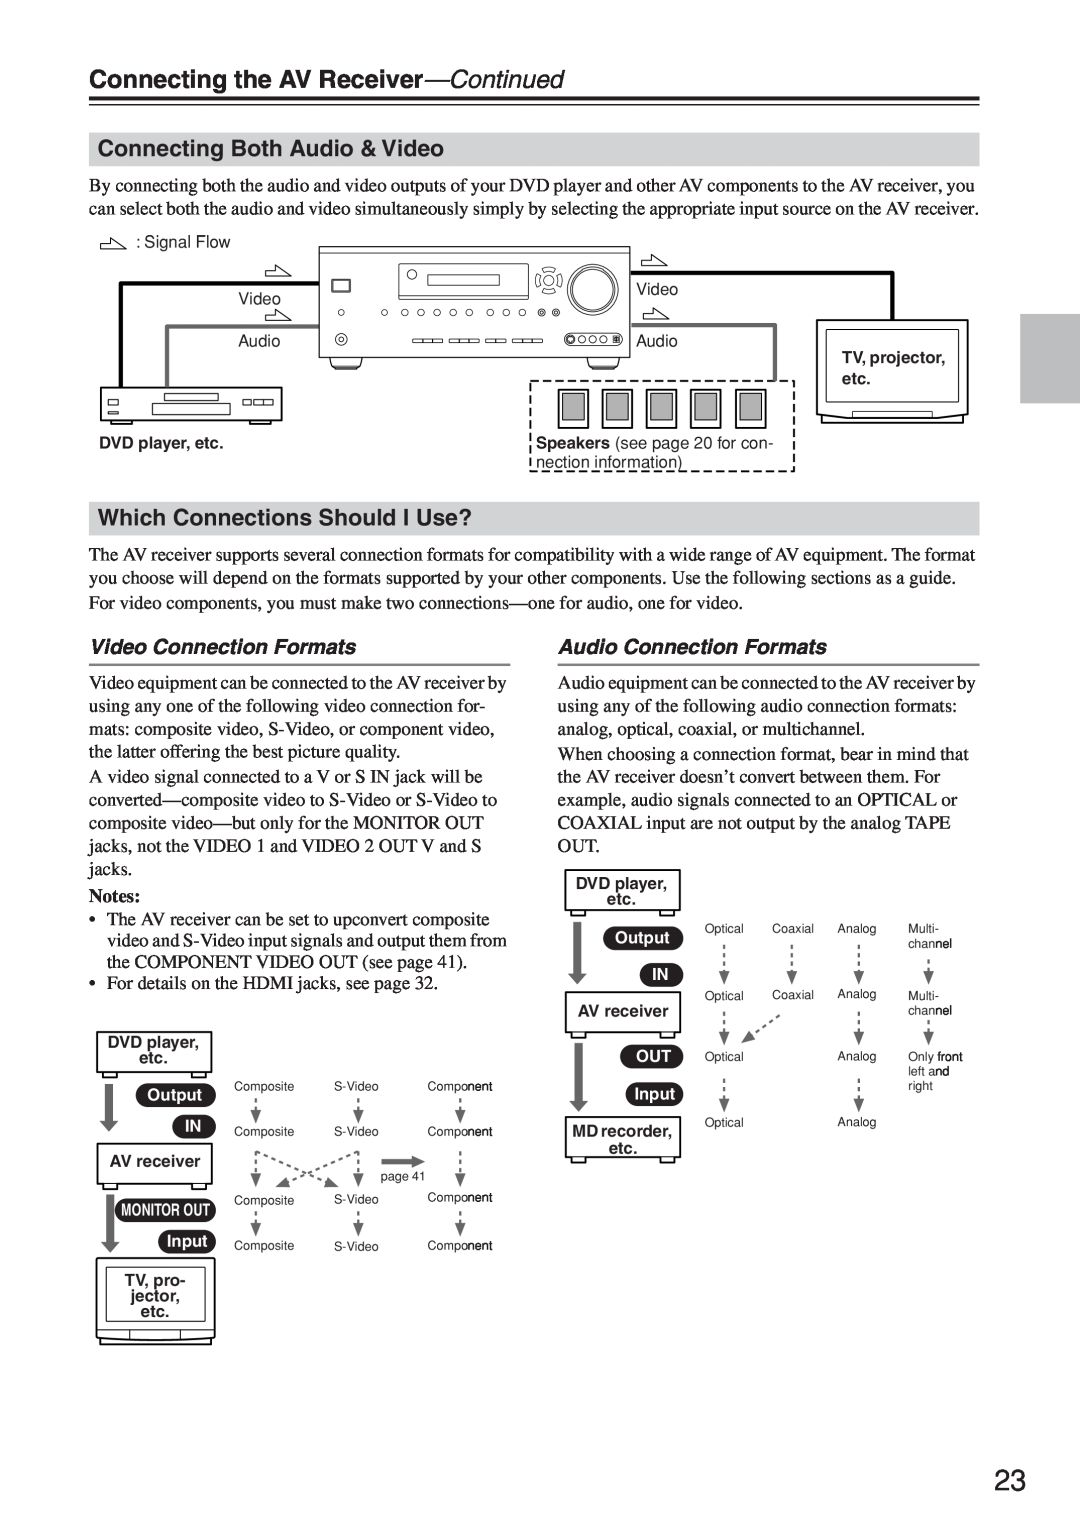 Onkyo HT-R640 instruction manual Connecting Both Audio & Video, Which Connections Should I Use?, Video Connection Formats 